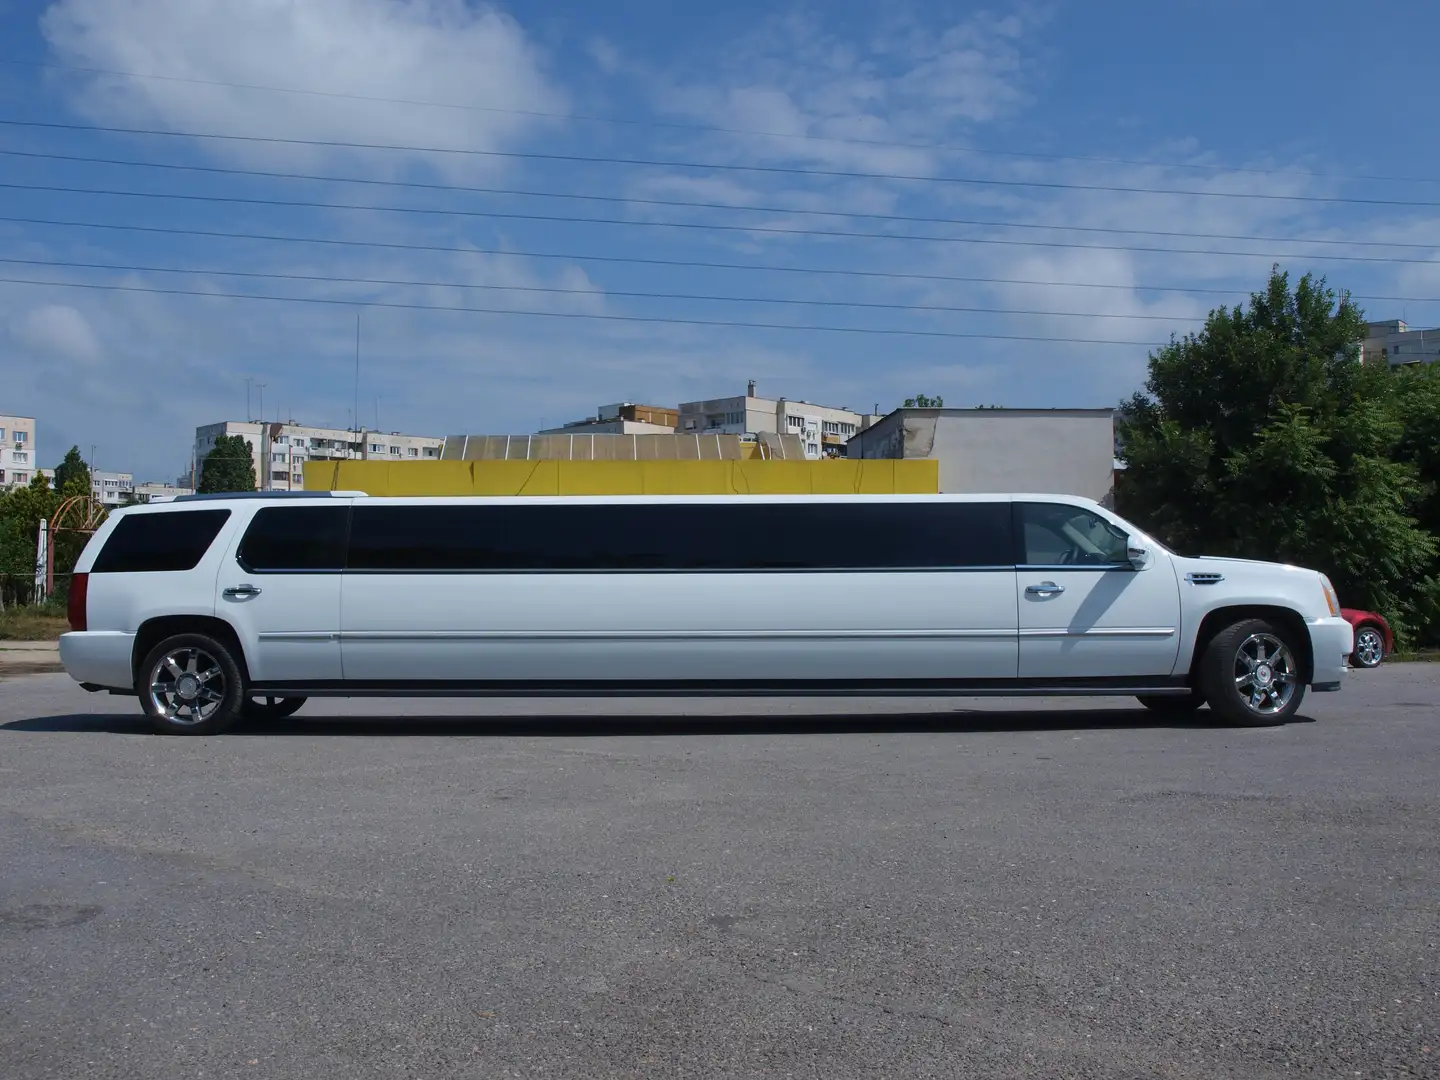 Cadillac Escalade 203-inch Stretch Limousine by Moonlight Industries Blanco - 2